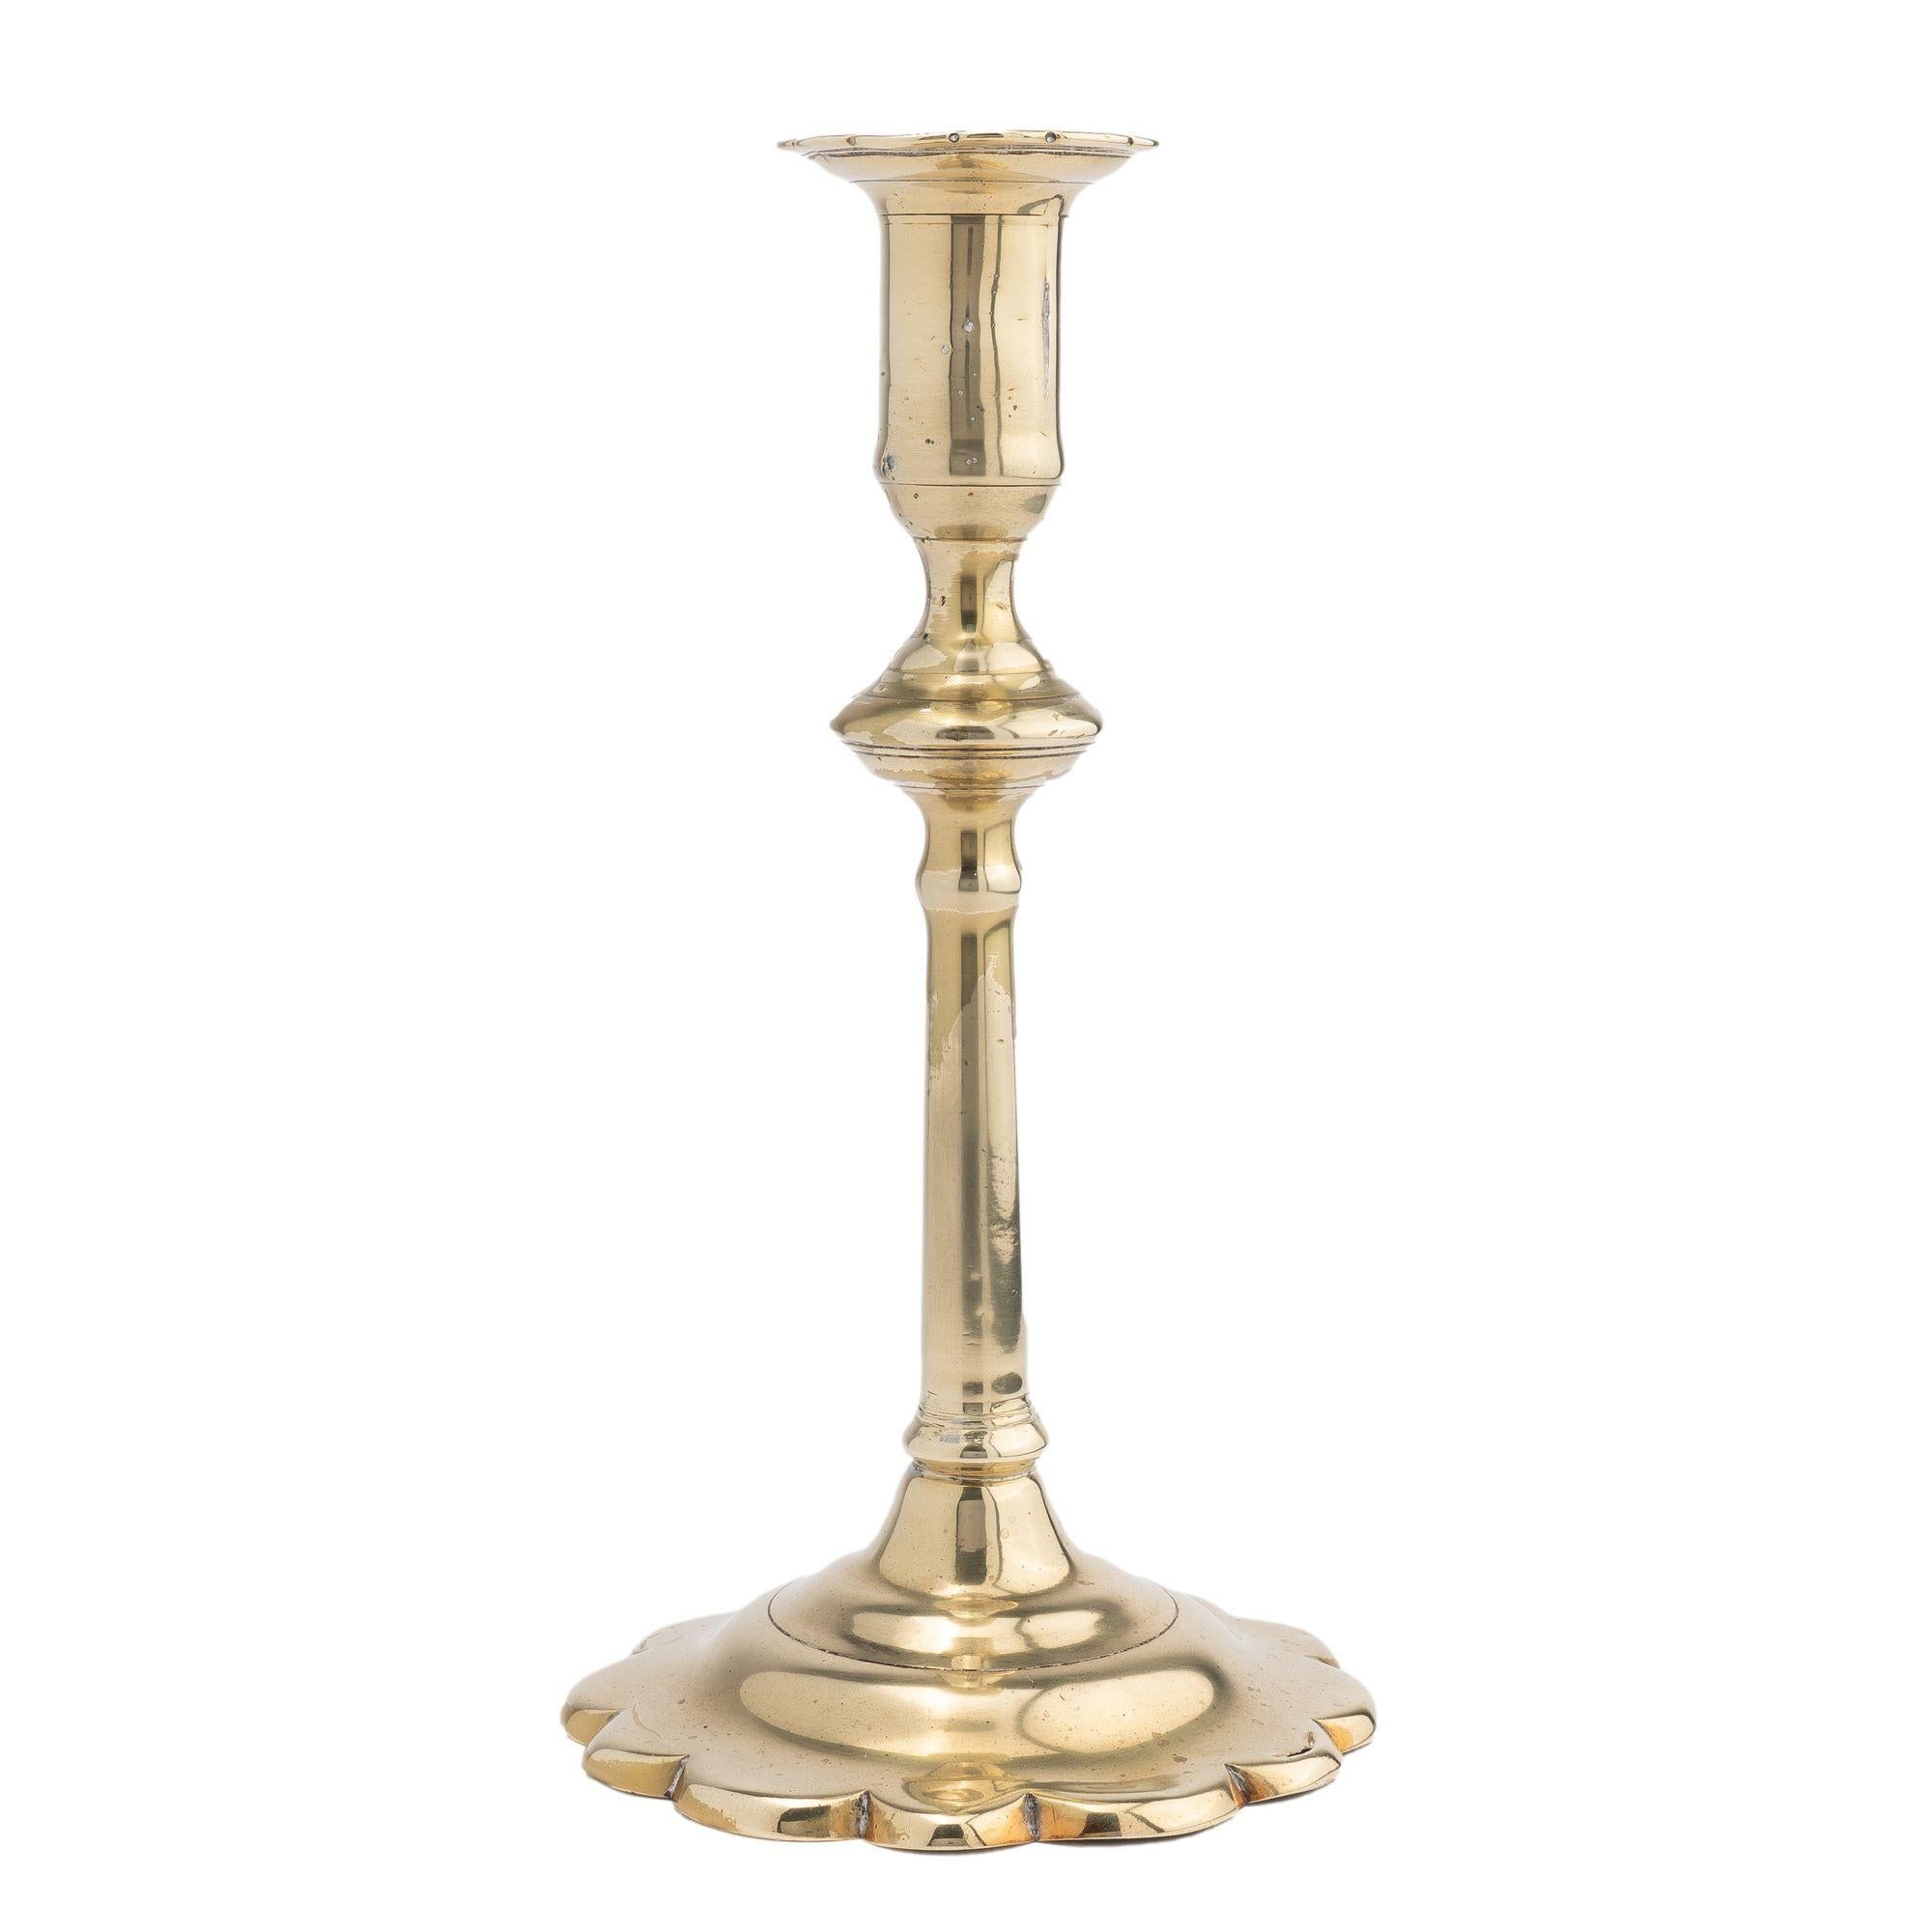 English Georgian cast brass Queen Anne candlestick. The candlestick shaft has a knob directly under the candle cup with a scolloped bobeshe. The candle cup sits above a slightly tapered cylindrical shaft which is peened to a domed base with